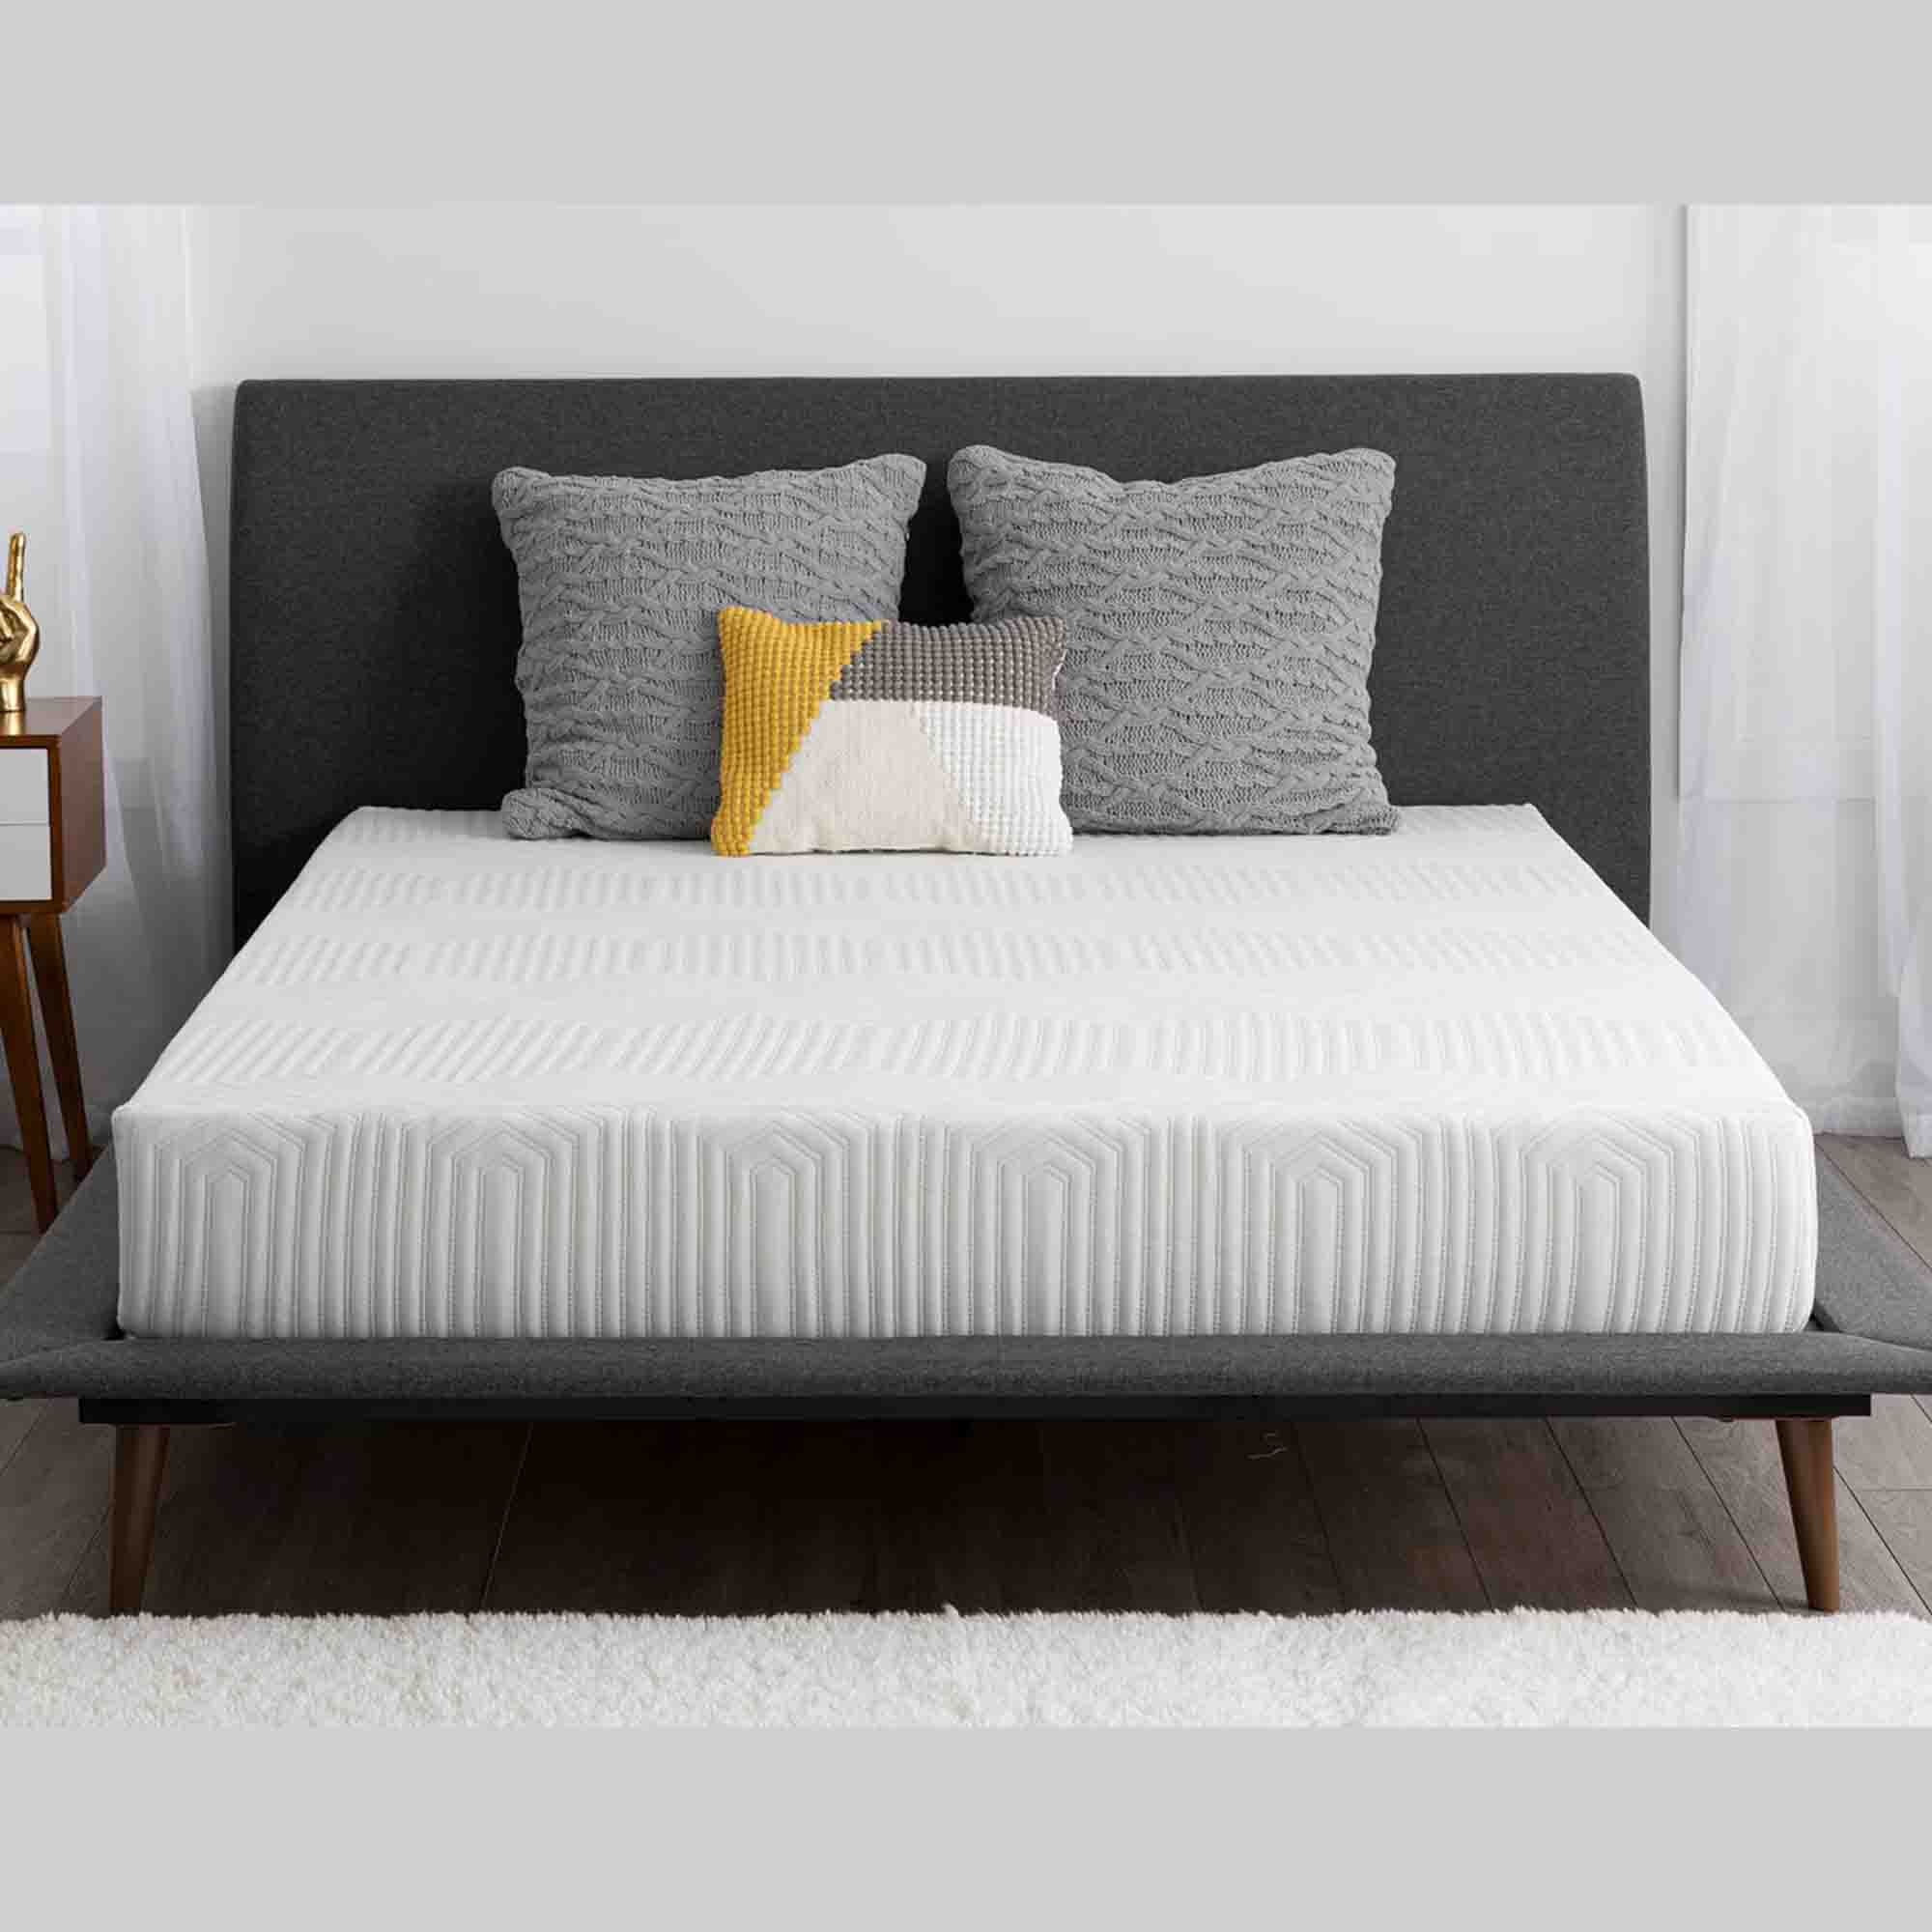 white memory foam mattress with three pillows on a dark grey bed frame